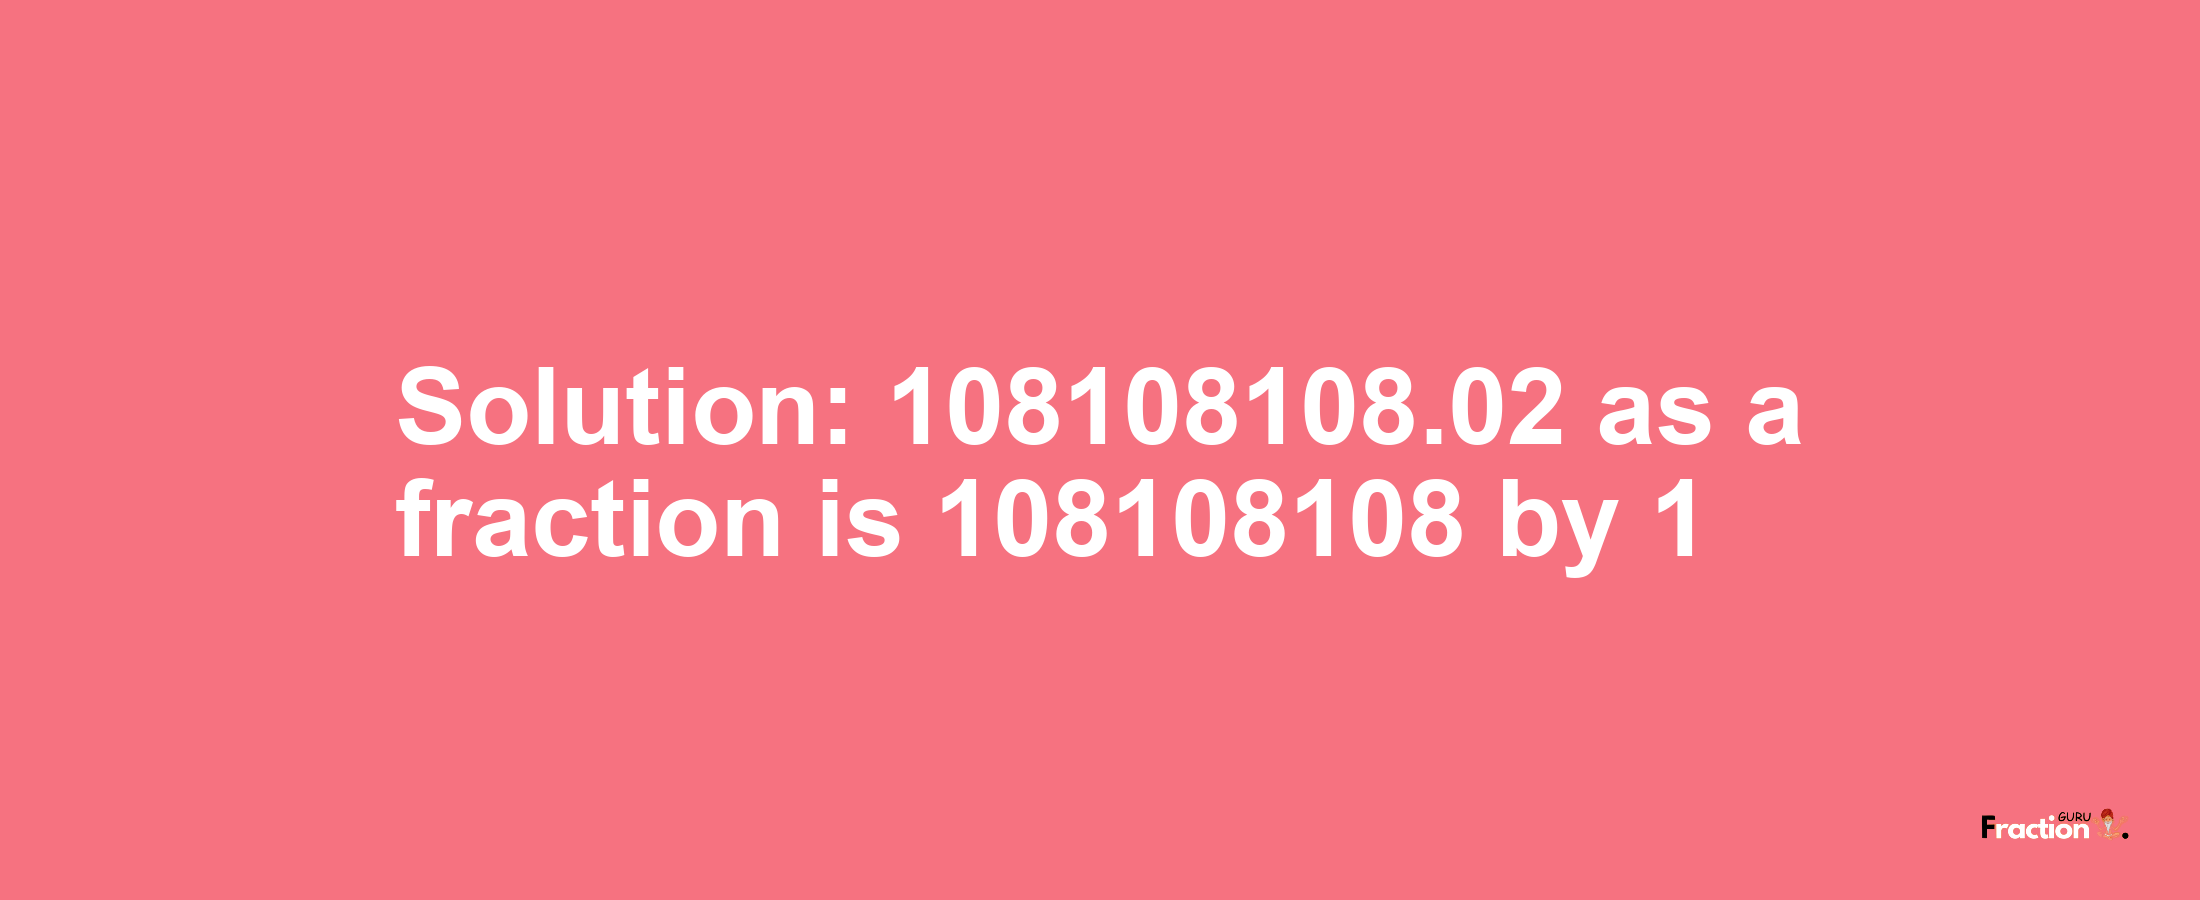 Solution:108108108.02 as a fraction is 108108108/1